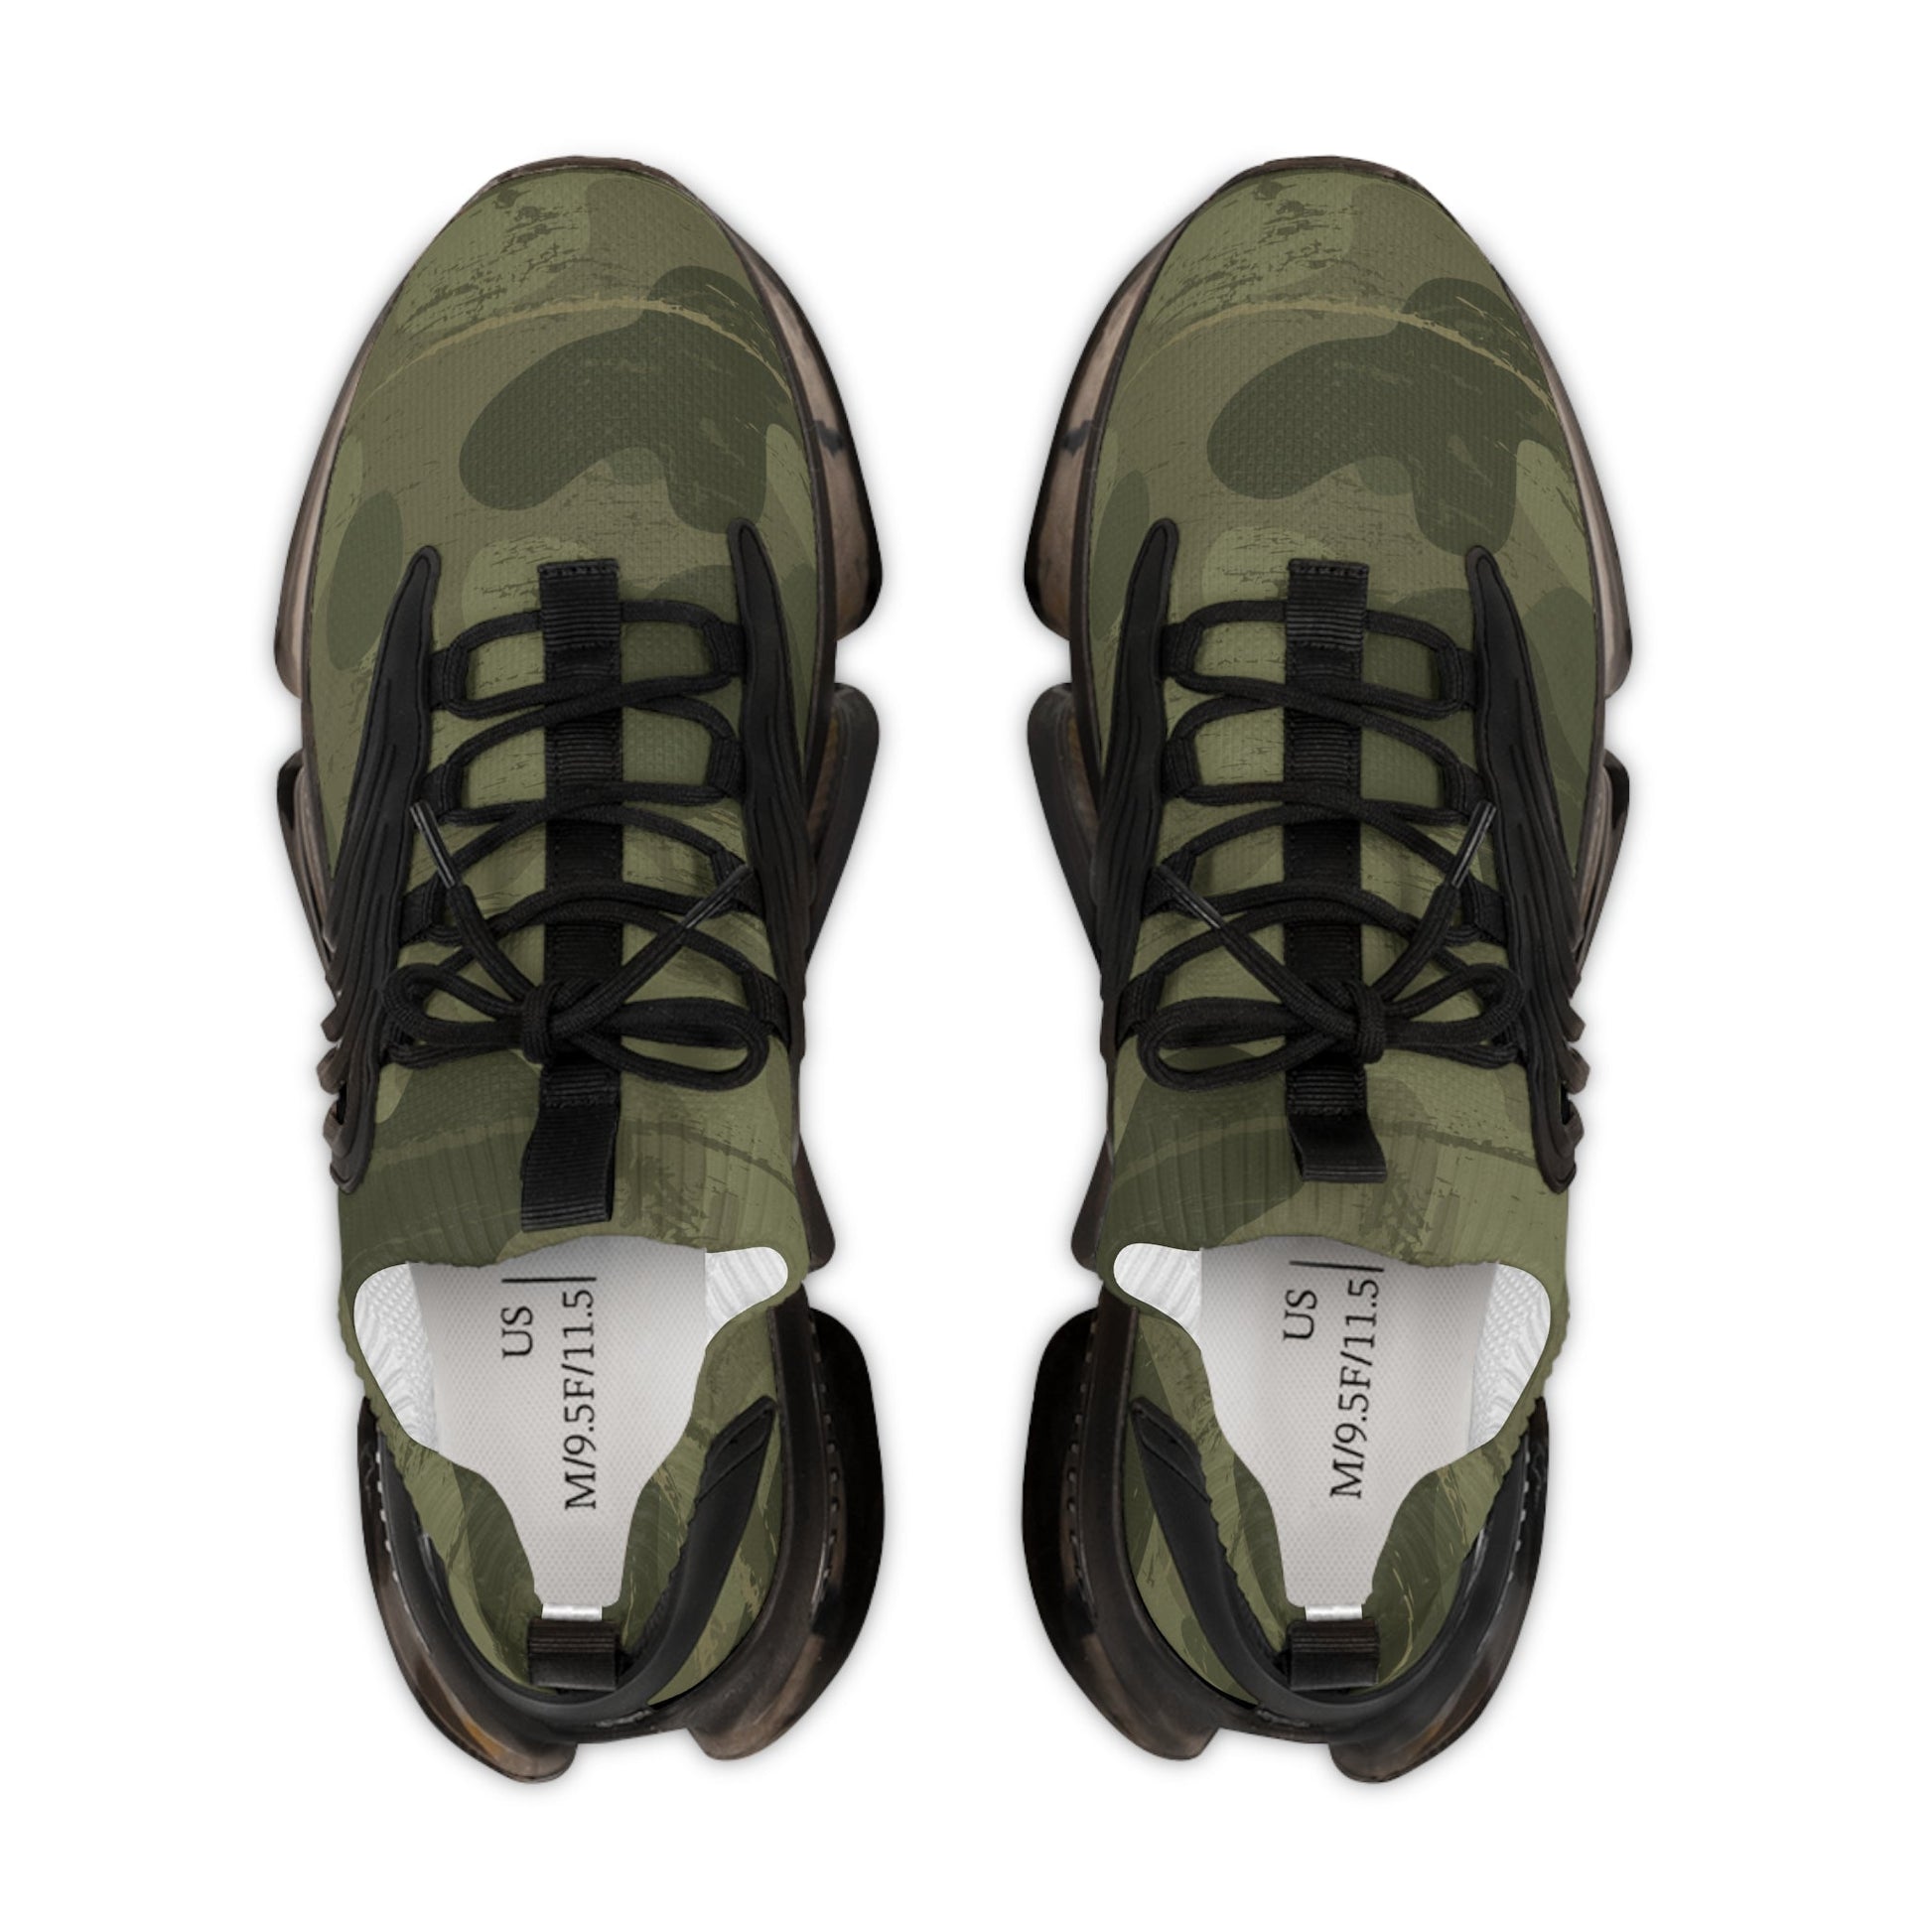 Shoes - Men's Mesh Sports Sneakers (Army Design)